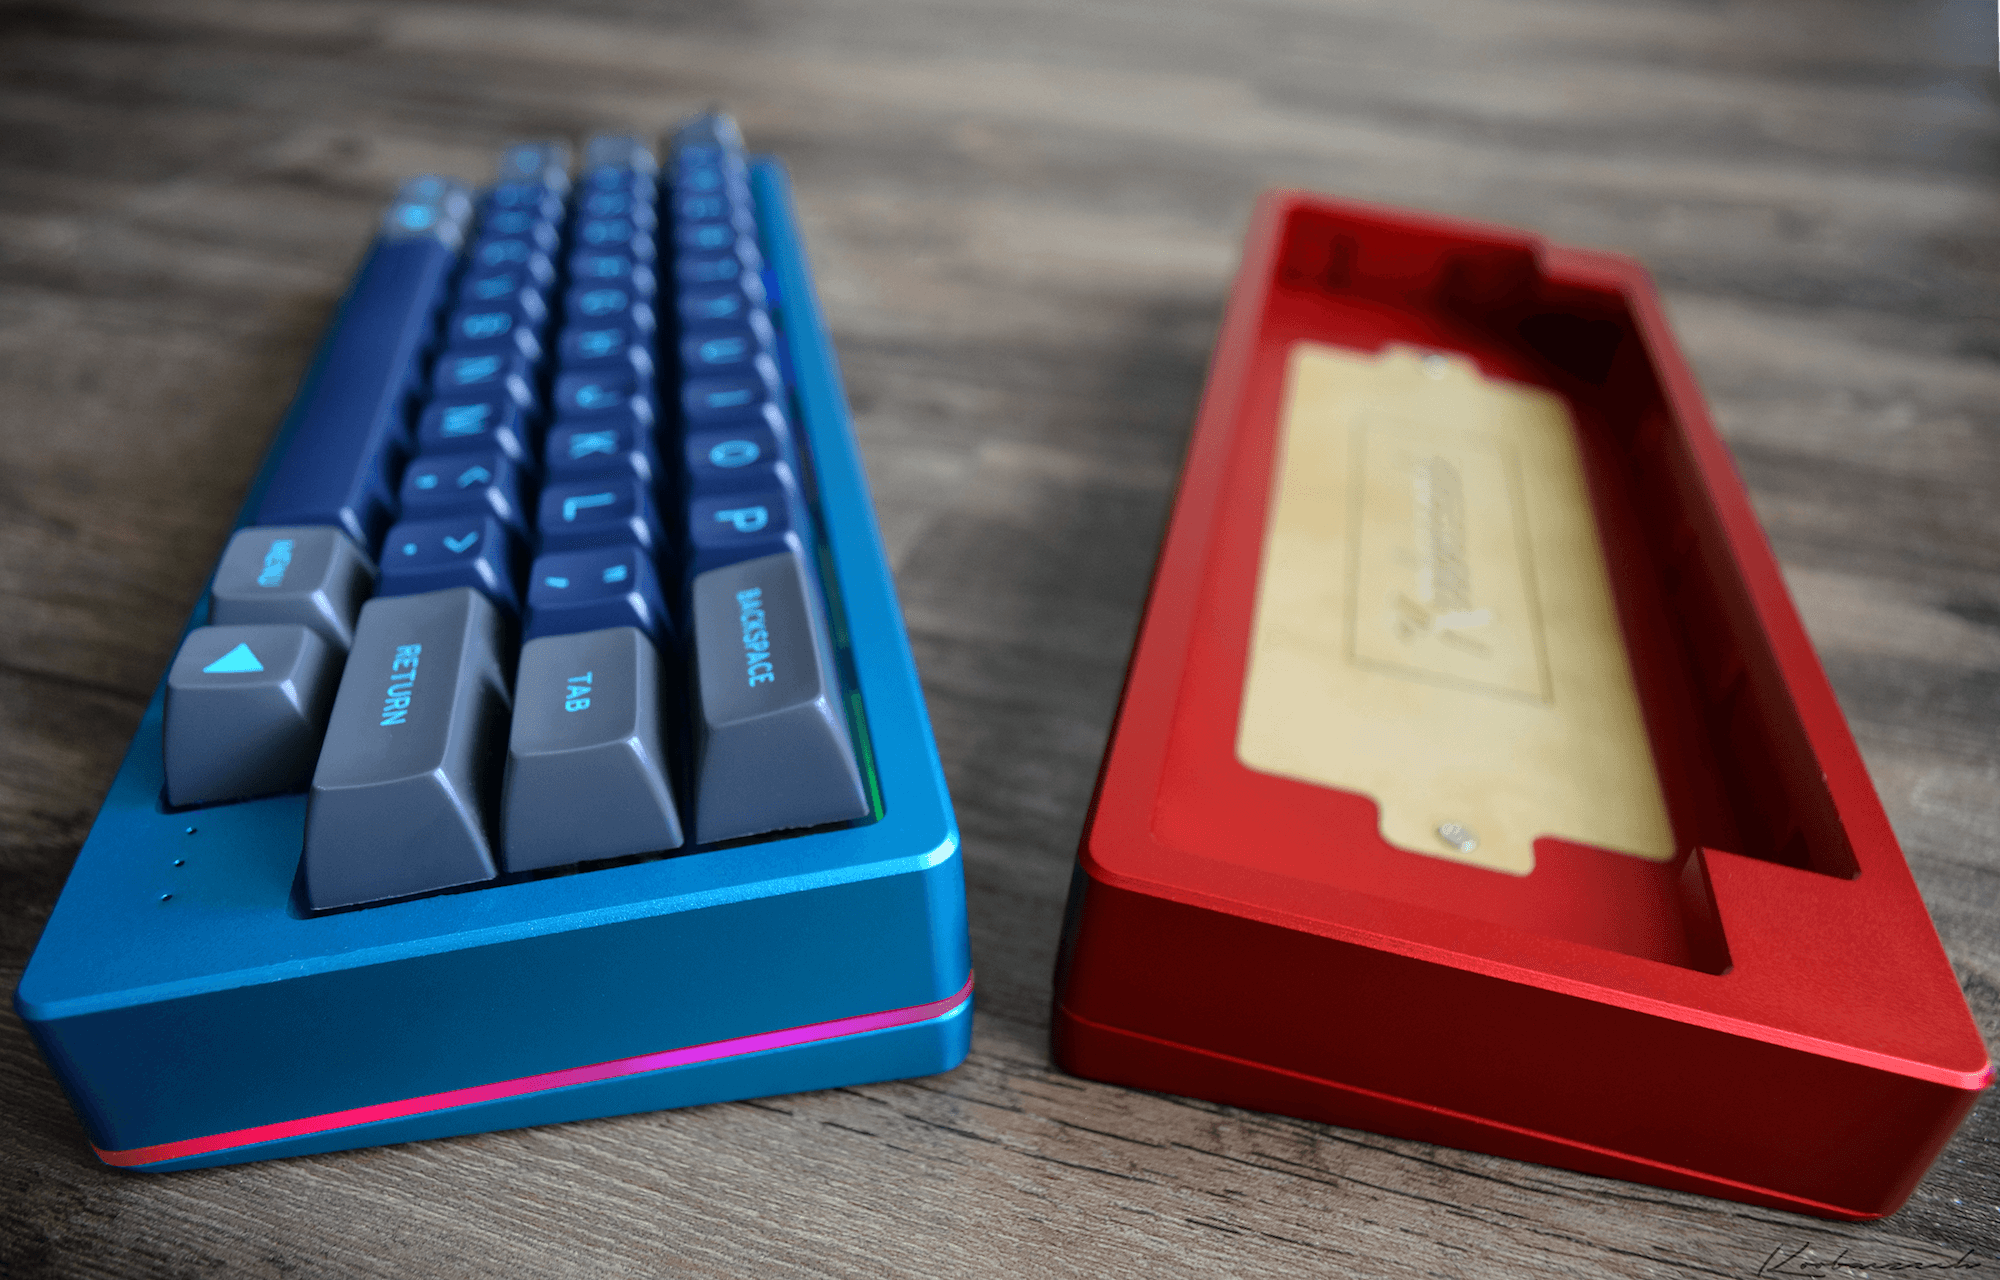 Build Your Own Mechanical Keyboard Project What You Need To Get